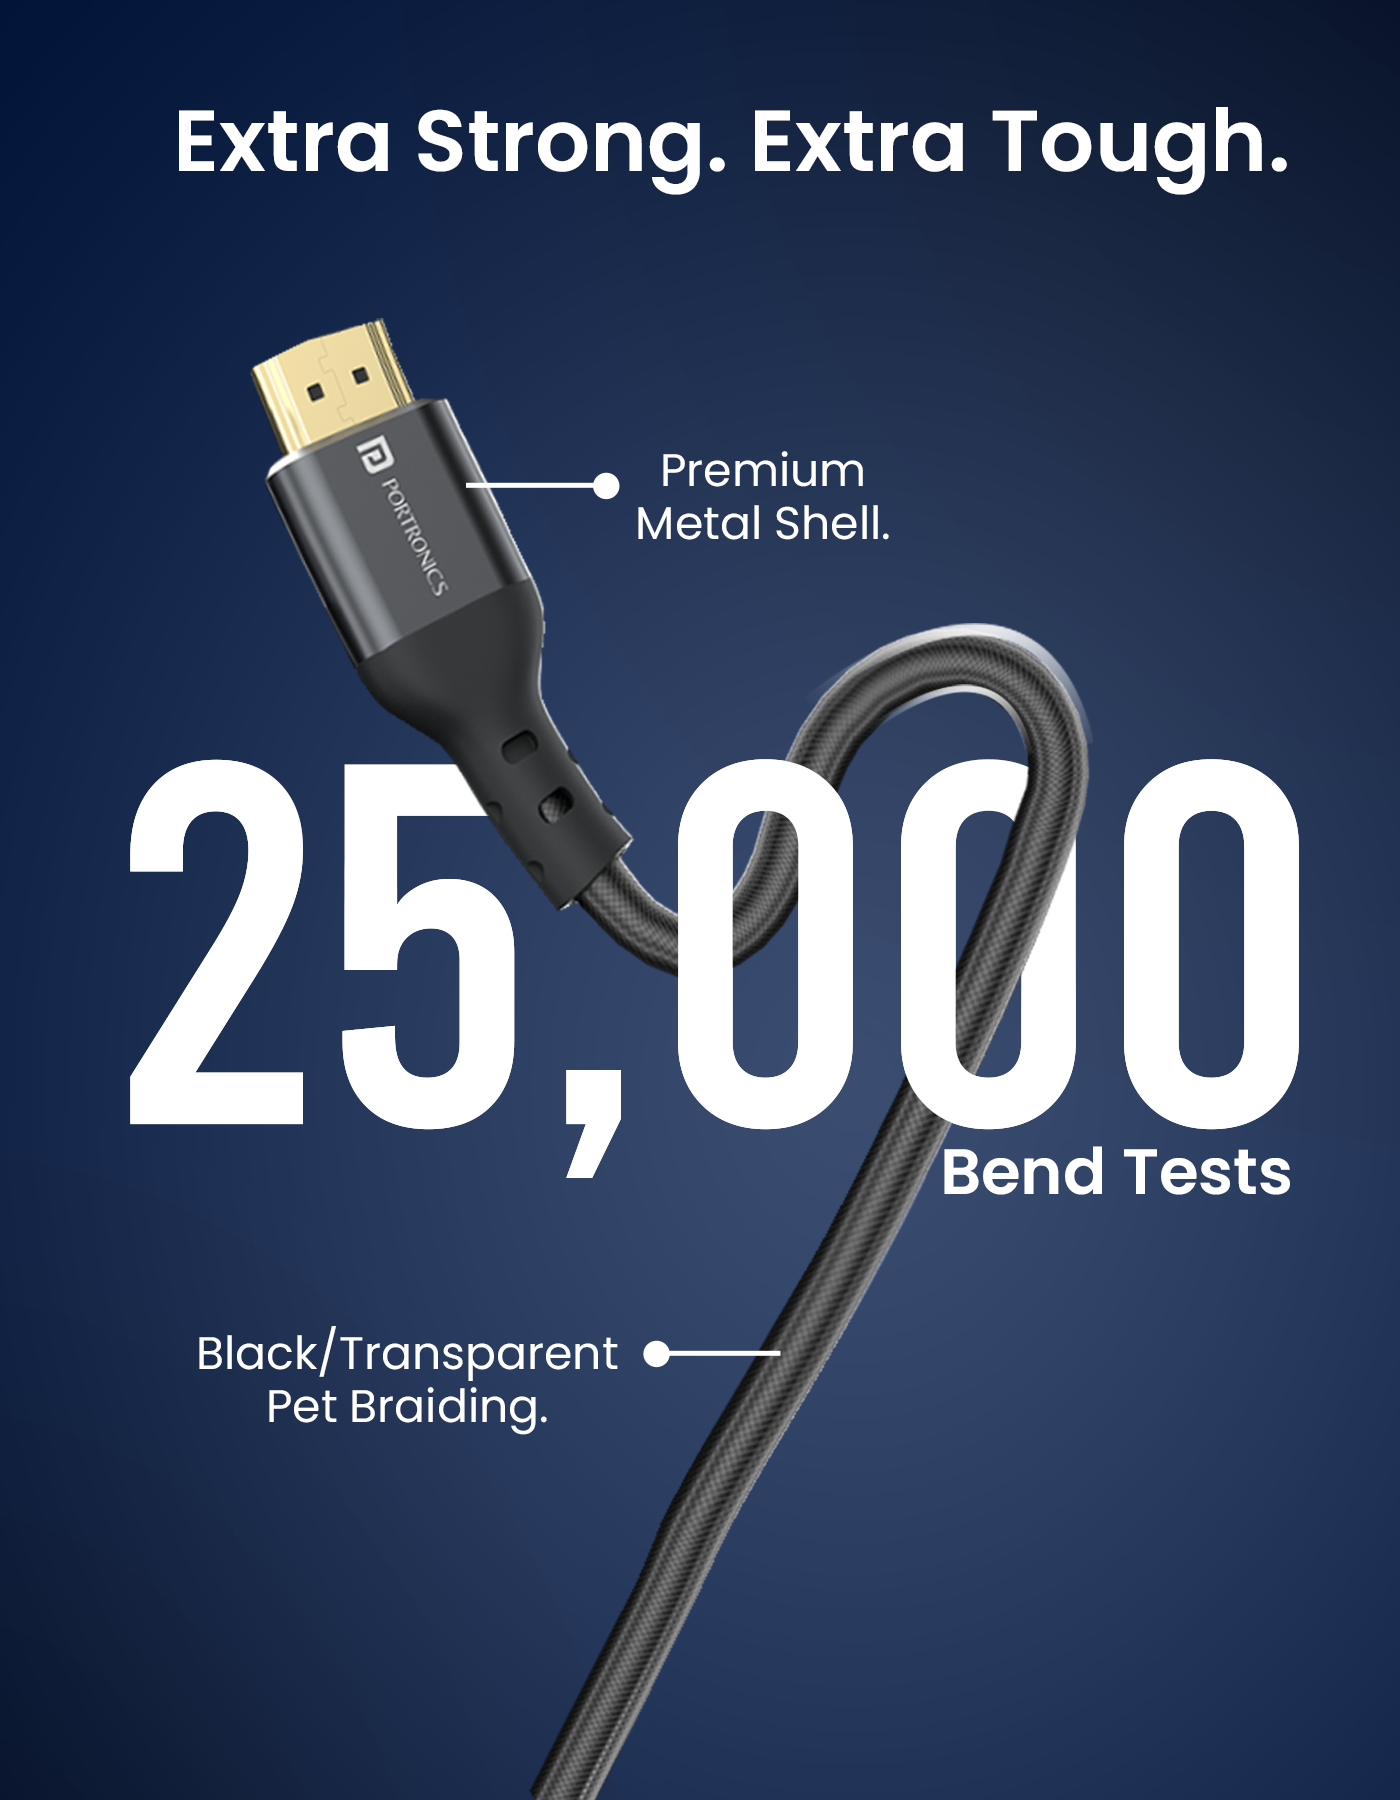 Portronics Konnect Spydr 31 3-in-one cable with micro USB, iOS, & Type C 1.2 meter long nylon cable